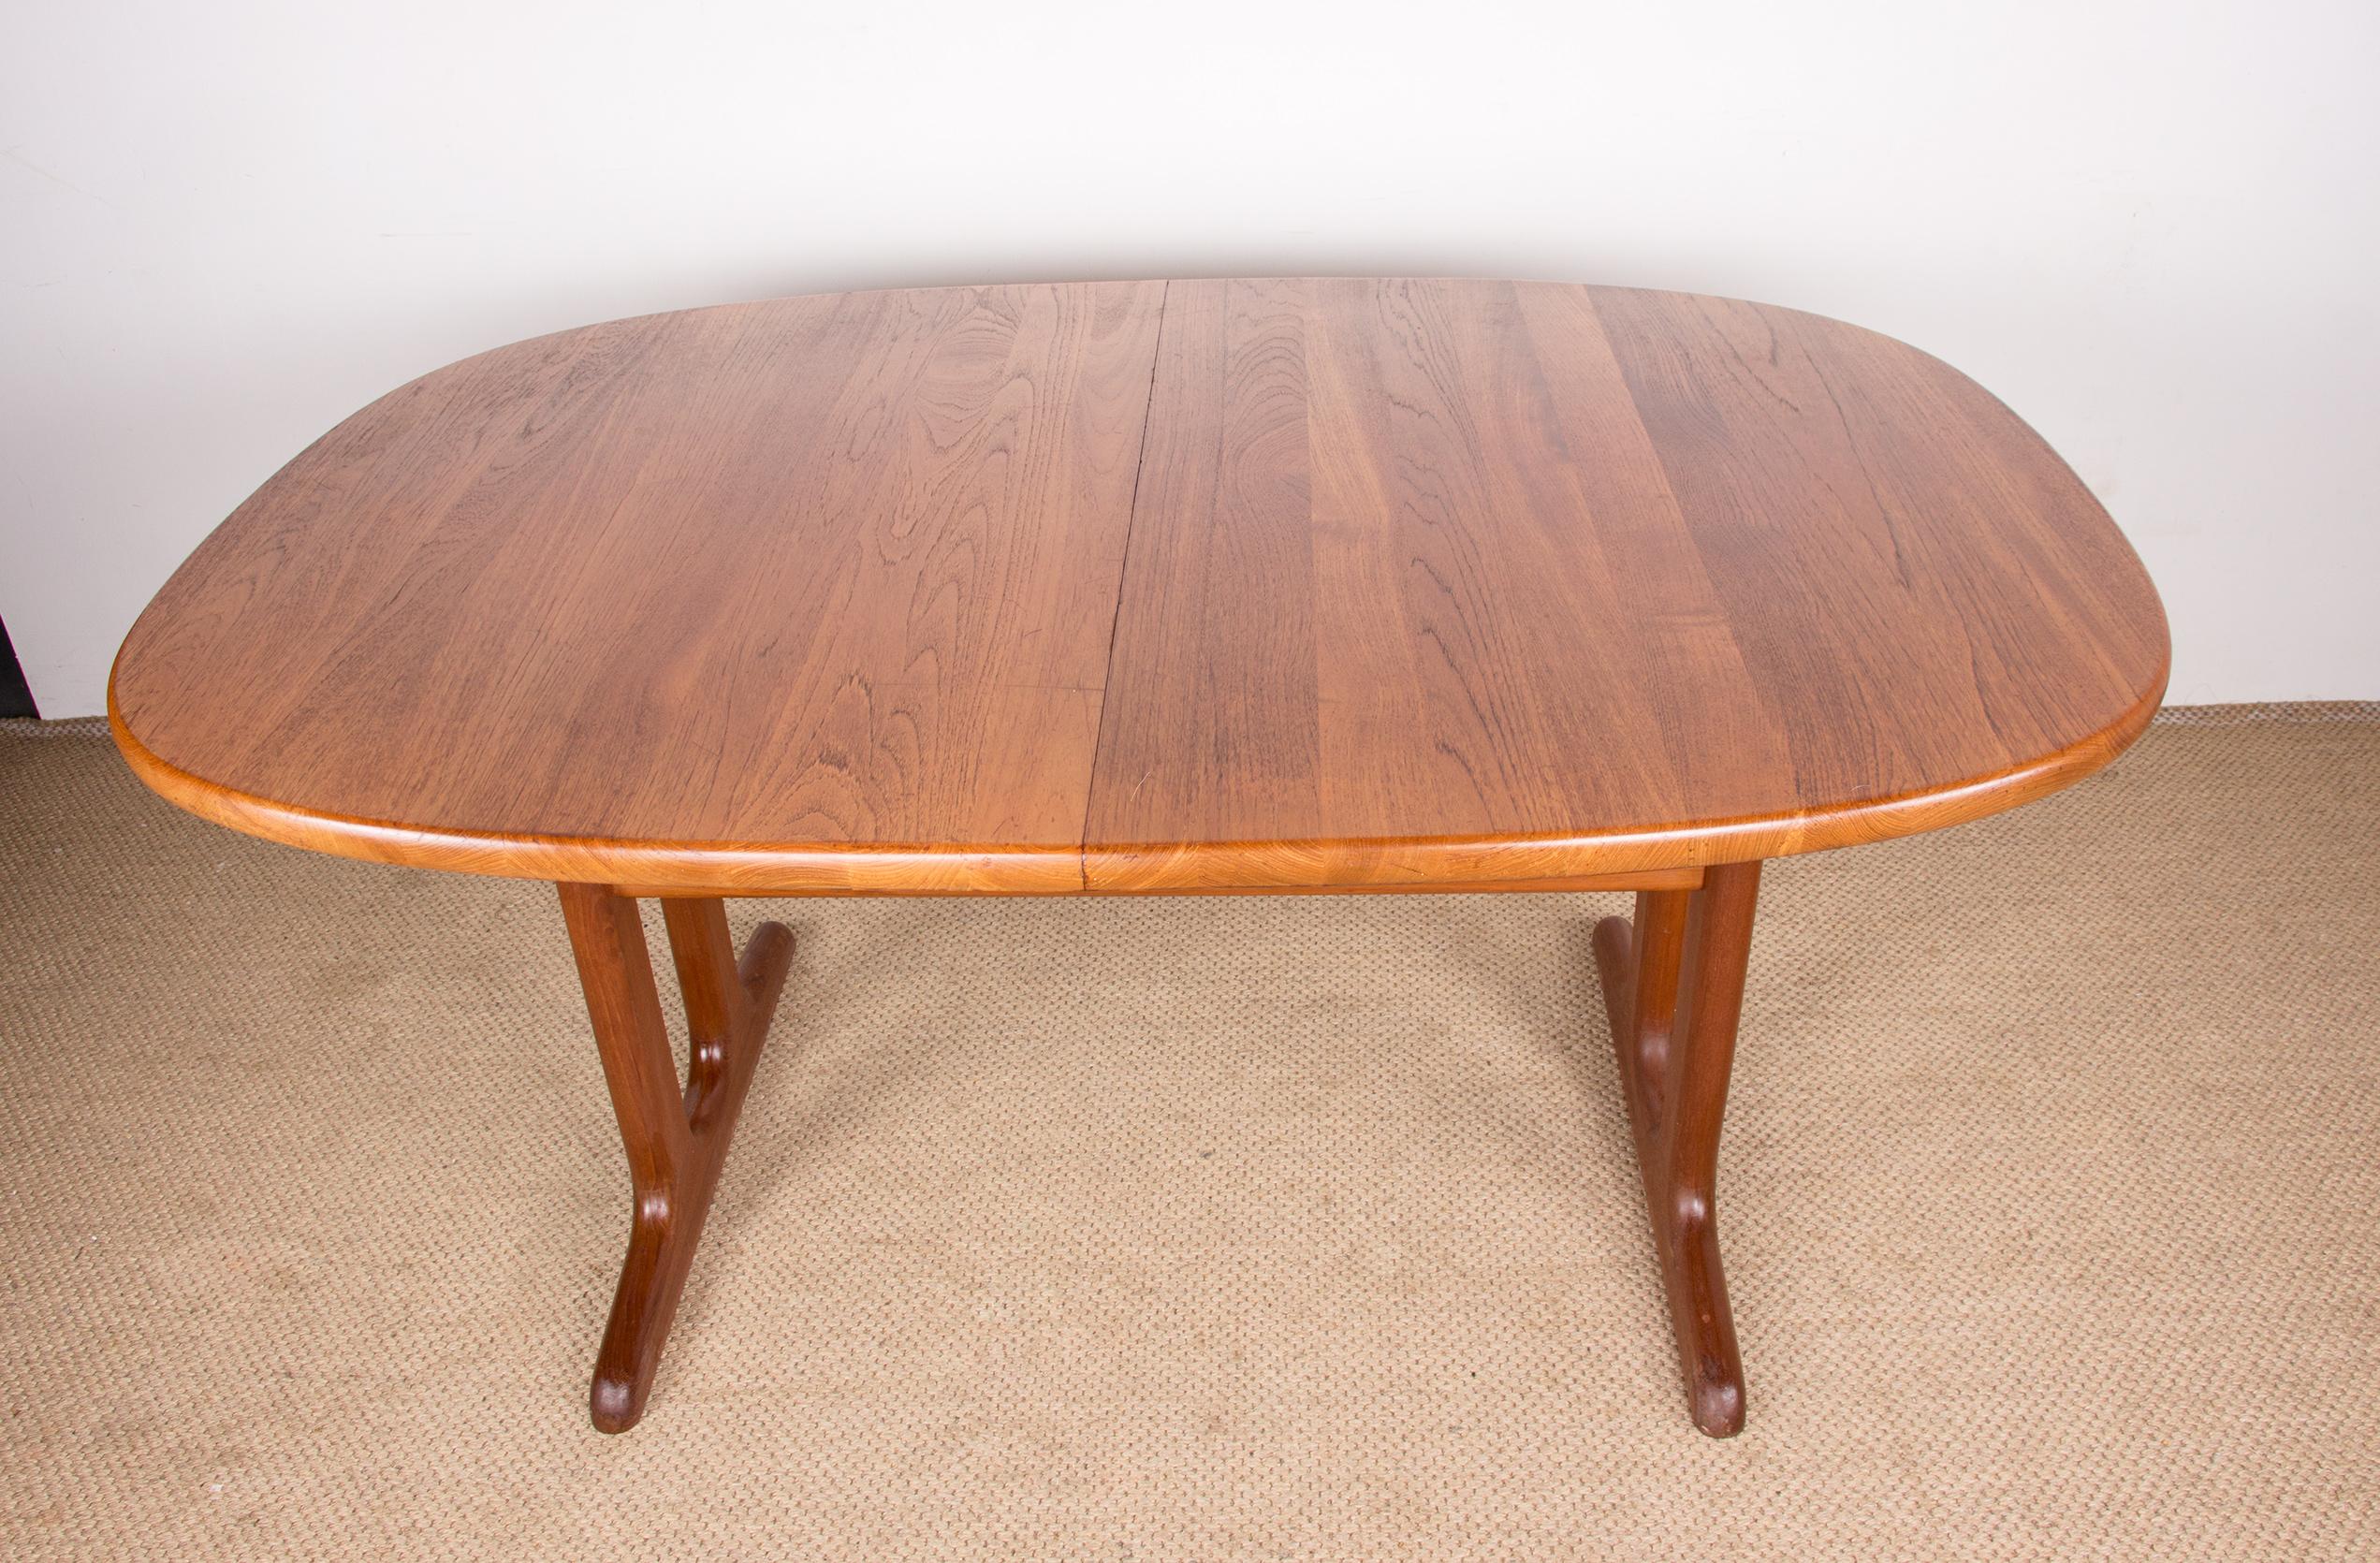 Beautiful Scandinavian dining room table in solid teak. 
Oval in shape with a double central base, it has 2 large extensions to accommodate 10/12 people. 
Robust construction of good quality, functional furniture ideal for large tables.
Length: 153,